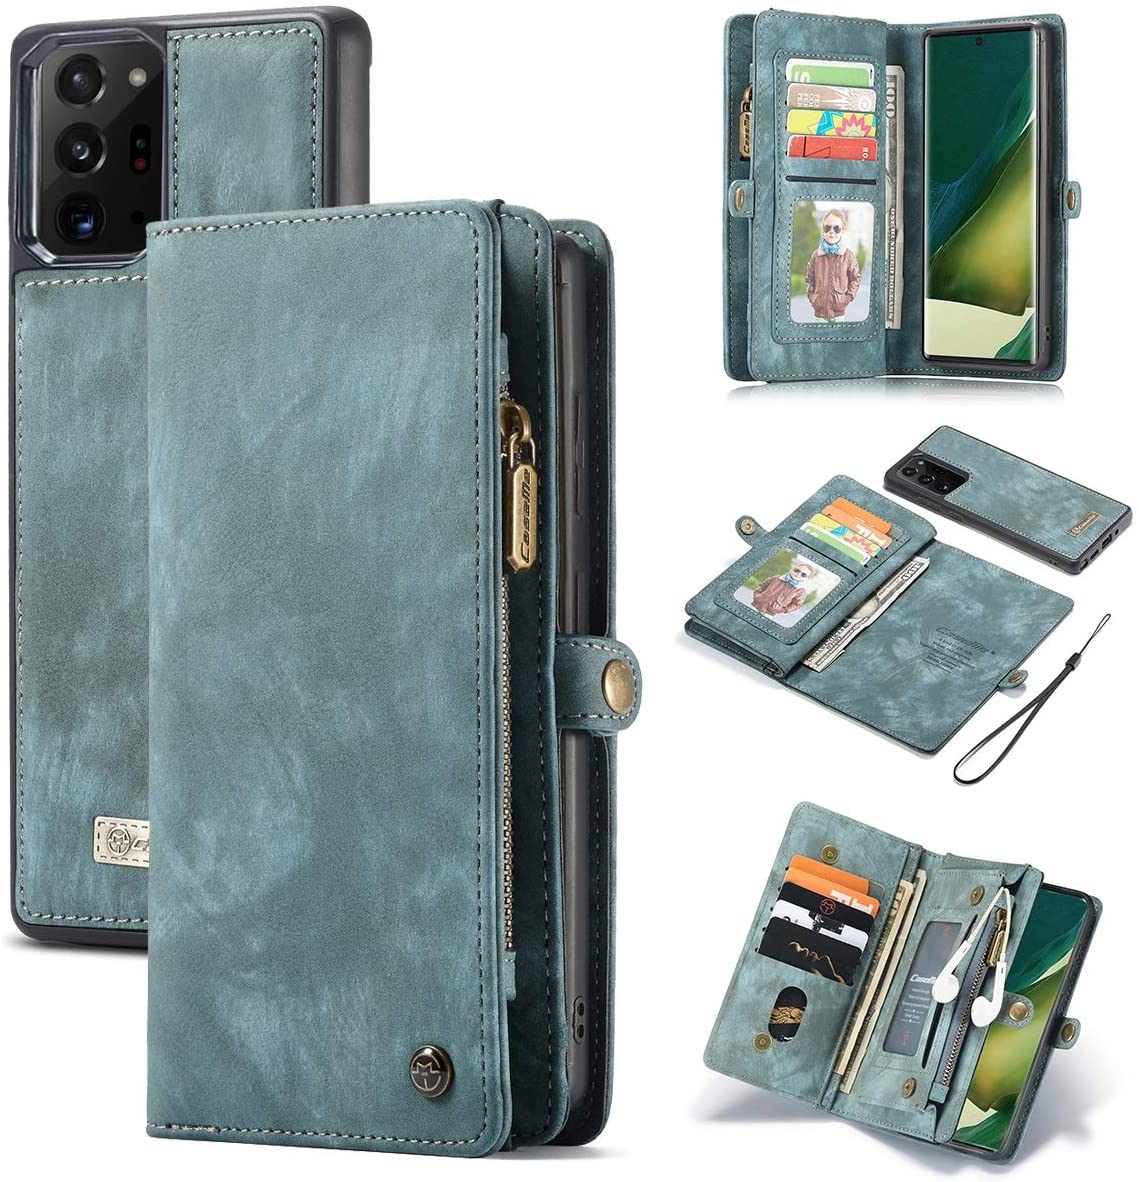 Samsung Galaxy Note 20 Ultra blue color leather wallet flip cover case By excelsior